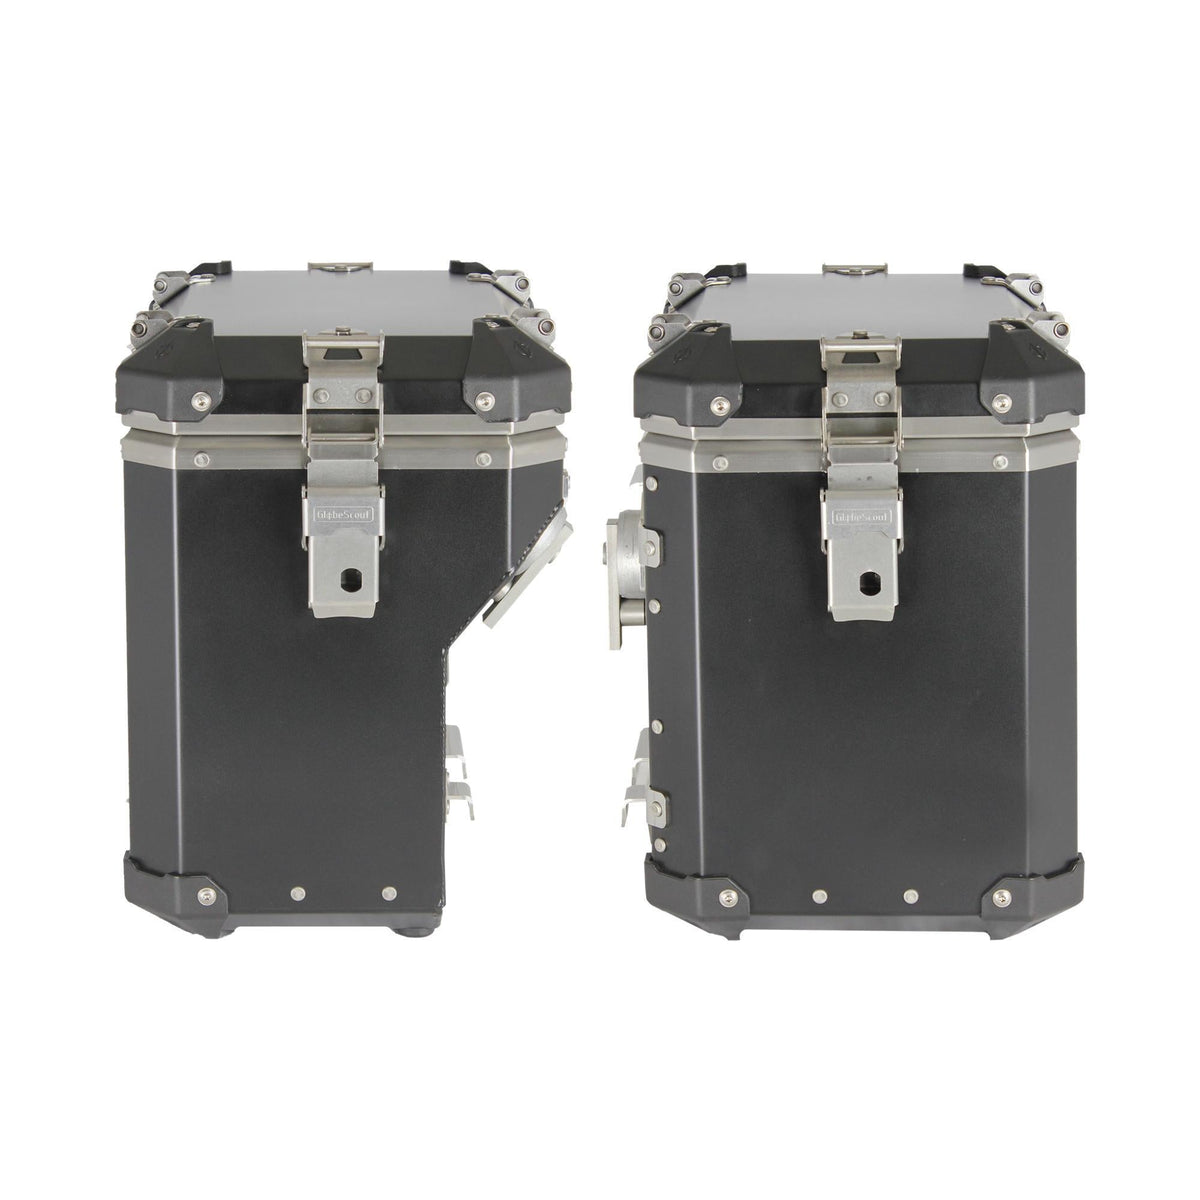 XPAN+ Aluminum Side Case Set, BMW R1200 LC Adventure (2014 - 2019) / R1250 GS Adventure (2019 - 2021) / F750 GS (2017 - 2021) / F850 GS (2019 - 2021), 2.02.01701, adventure bike luggage, adventure motorcycle panniers, aluminum side cases, BMW, BMW F750 GS, BMW F850 GS, BMW R1200  LC Adventure, BMW R1250 GS Adventure, GlobeScout motorcycle luggage, GlobeScout XPAN+, Side Case Sets, XPAN+, Side Case Sets - Imported and distributed in North &amp; South America by Lindeco Genuine Powersports - Premier Powersports E